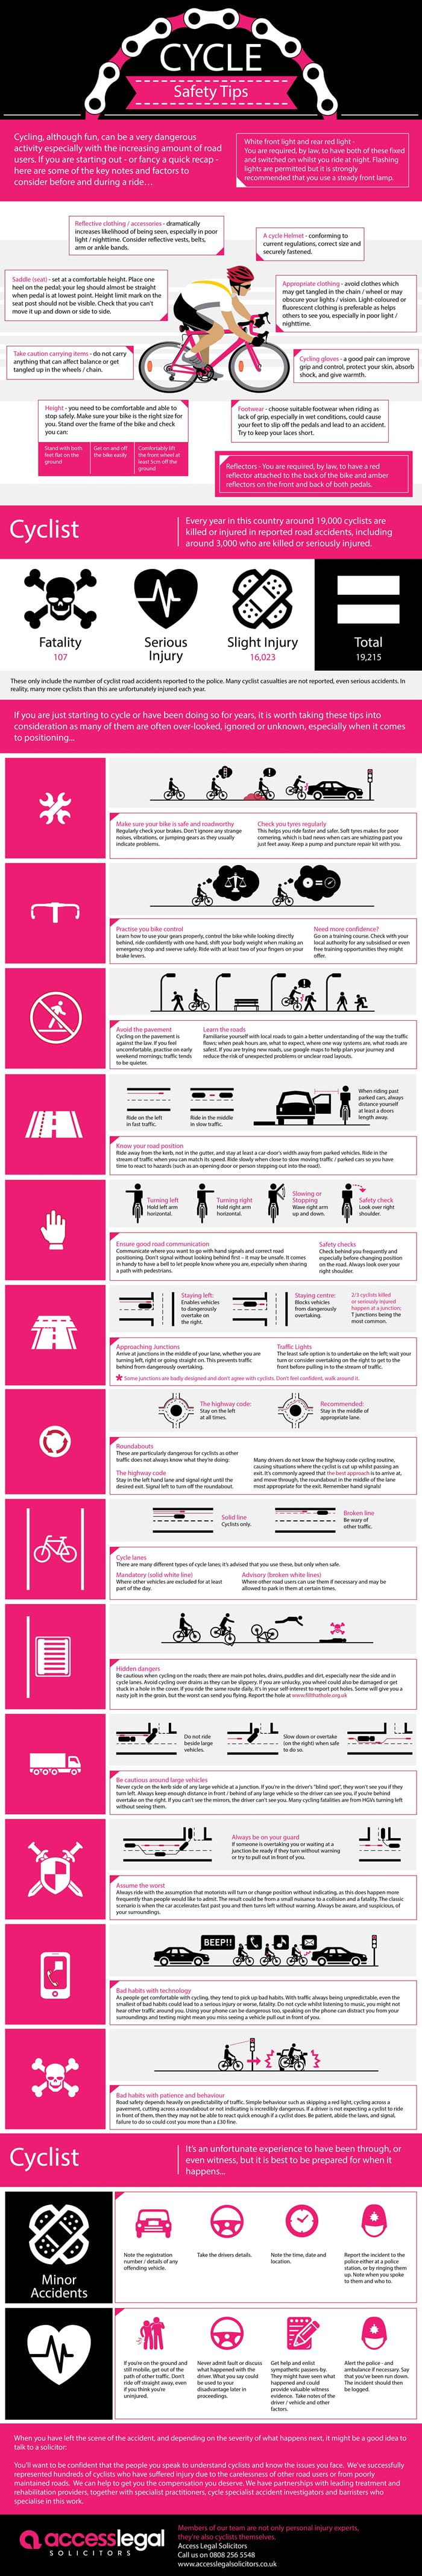 Cycle Injury Accident Infographic